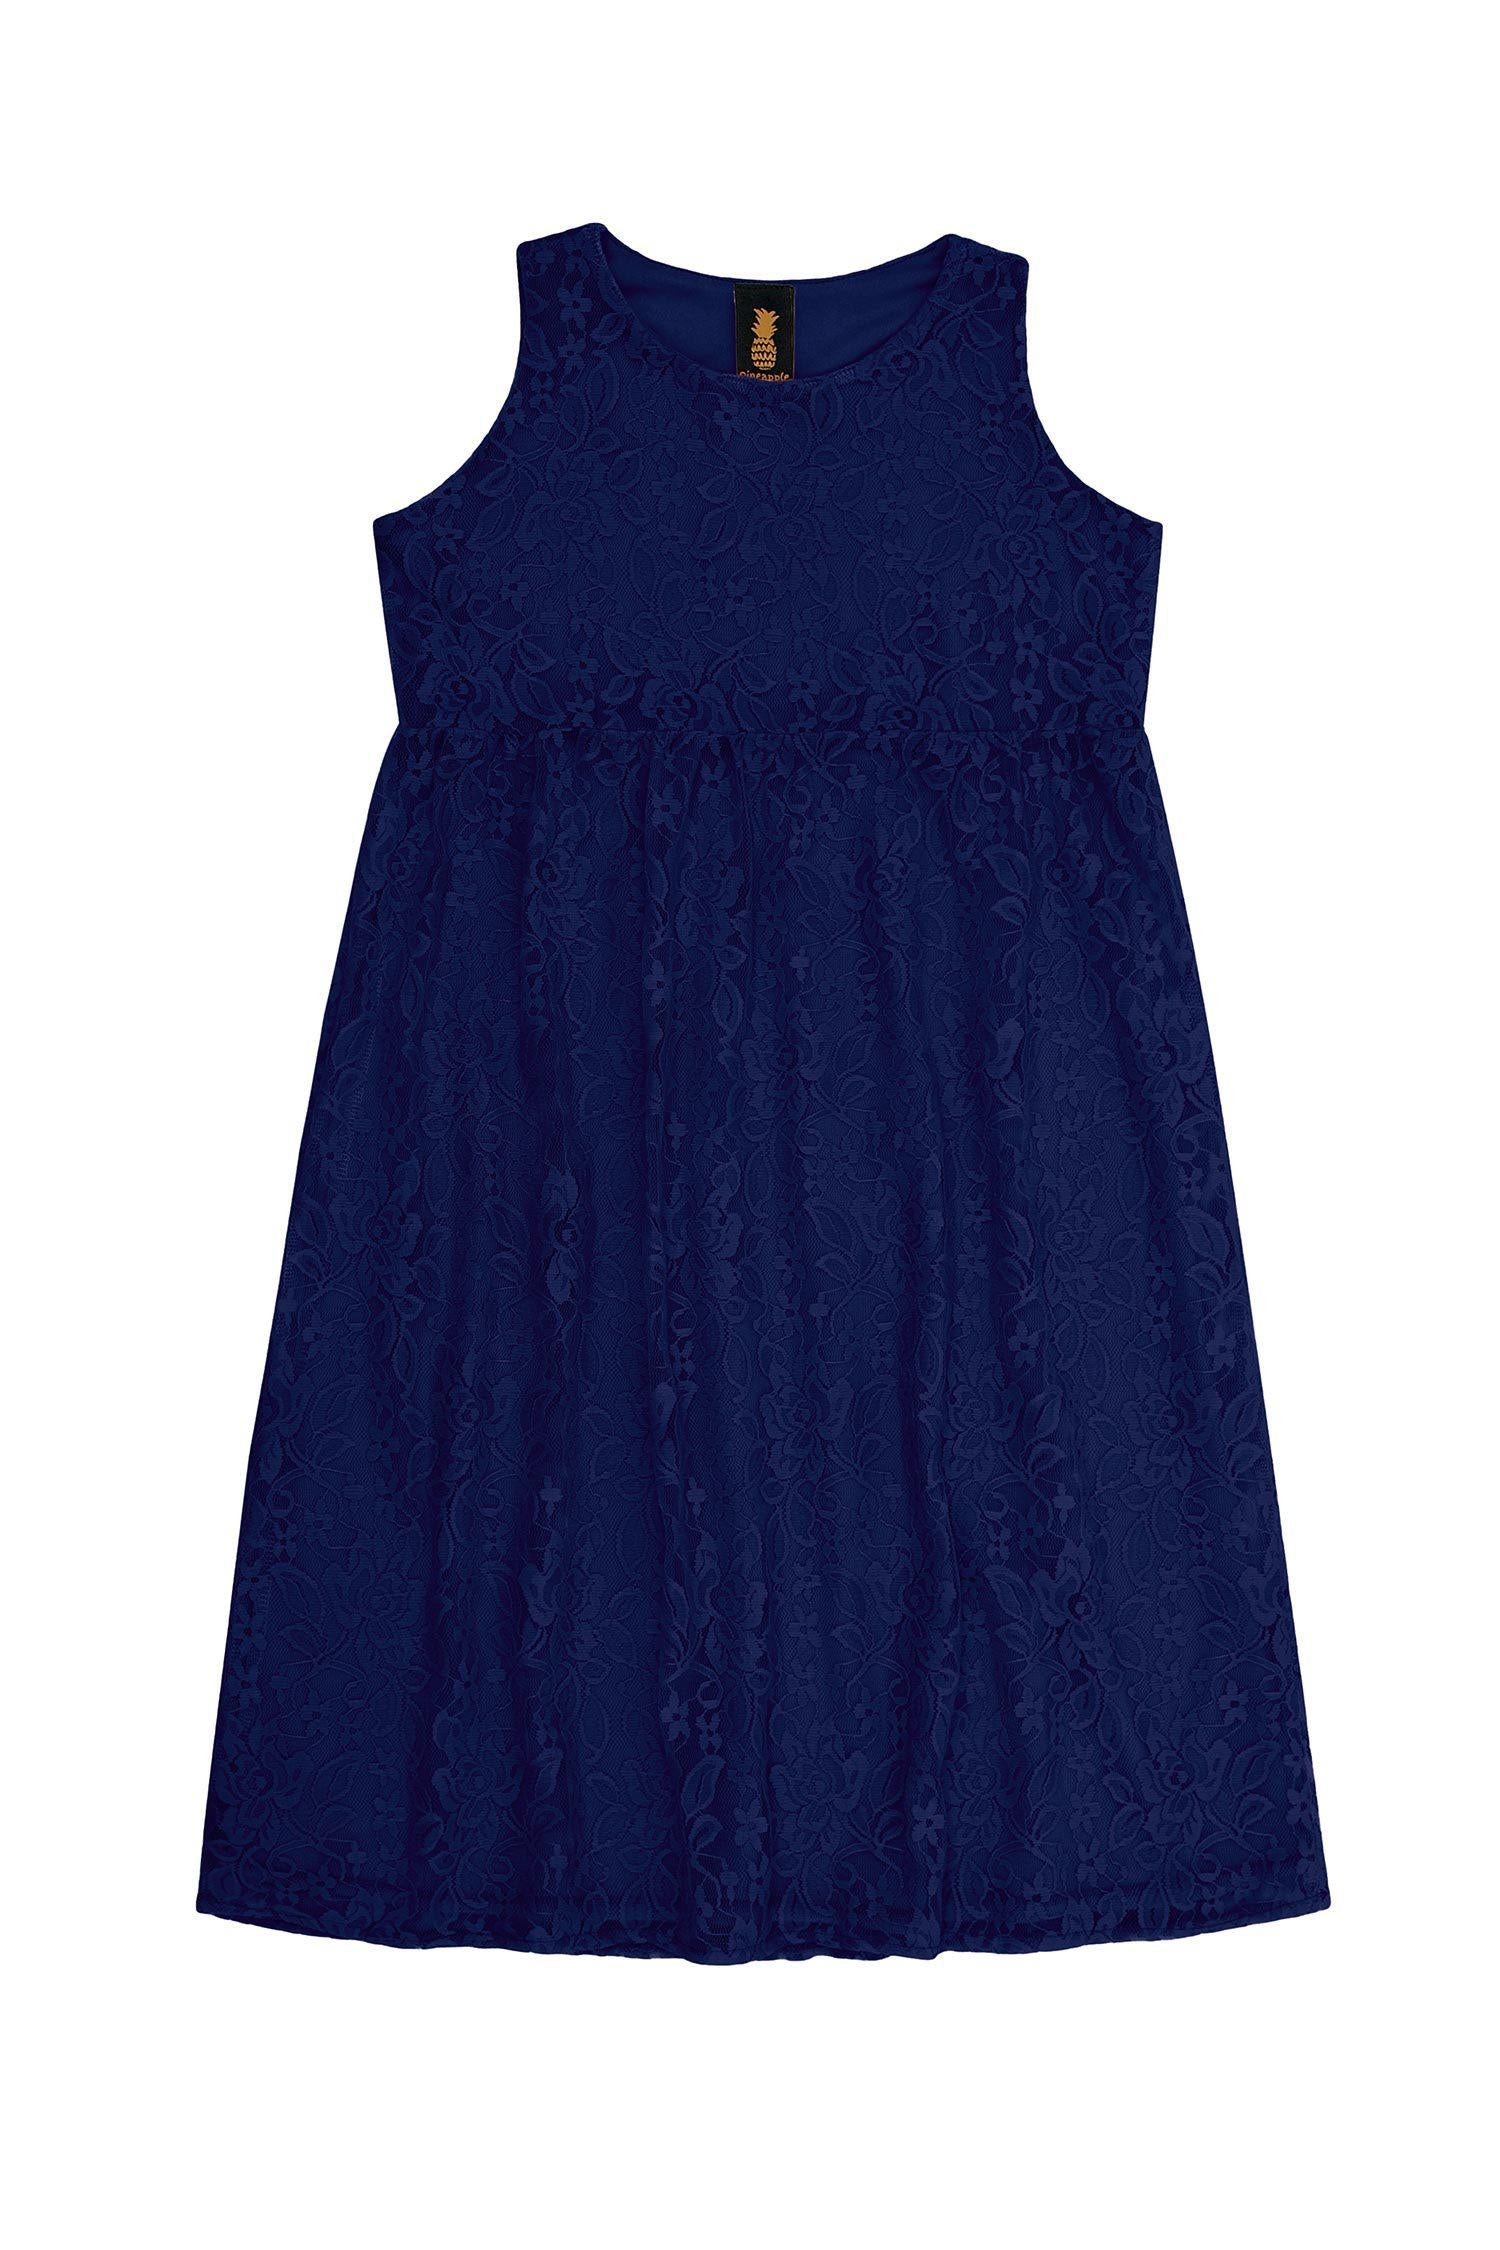 Deep Navy Stretchy Lace Empire Waist Sleeveless Party Dress - Girls - Pineapple Clothing